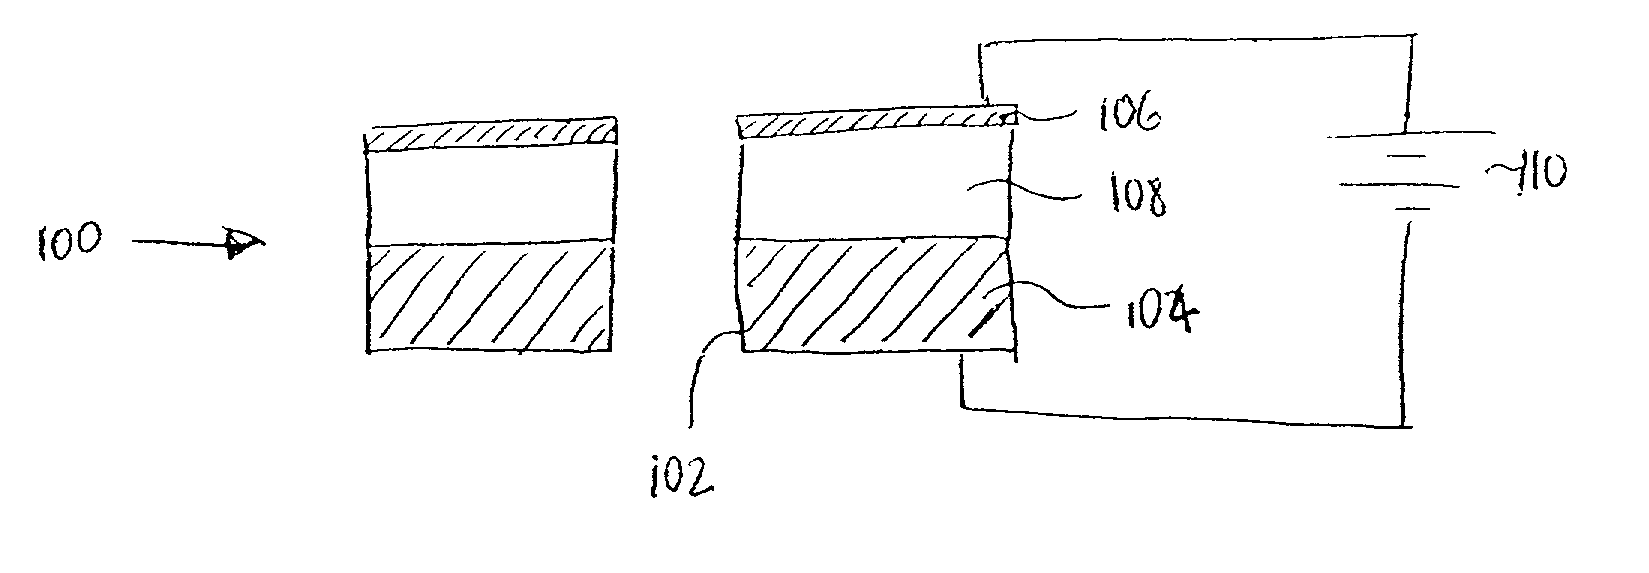 Microdischarge devices and arrays